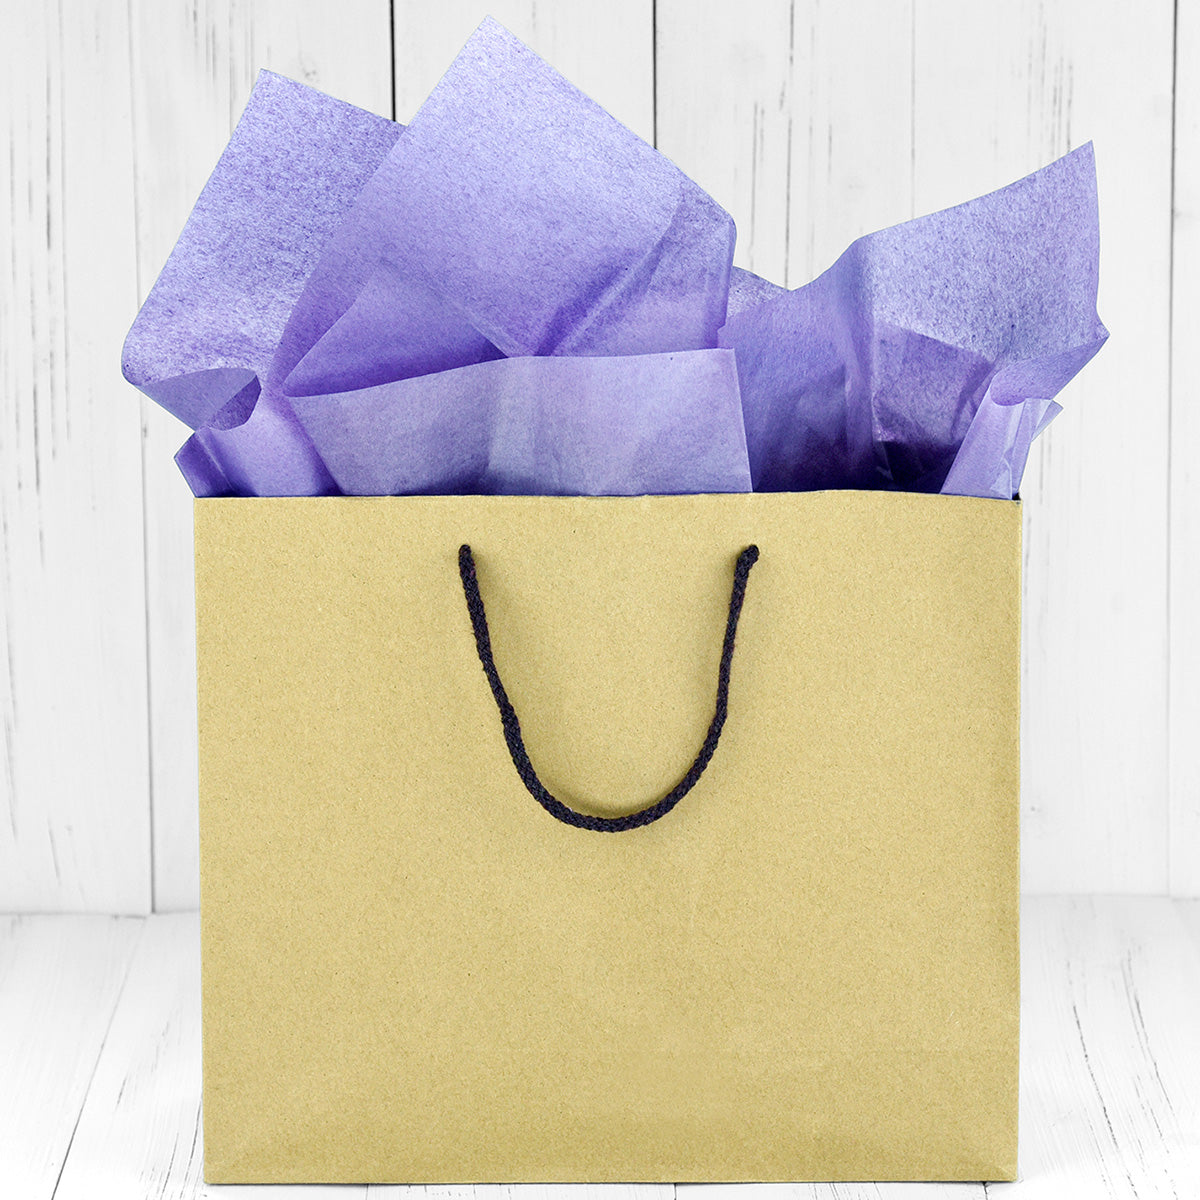 50 Sheets Light Purple Wrapping Tissue Paper